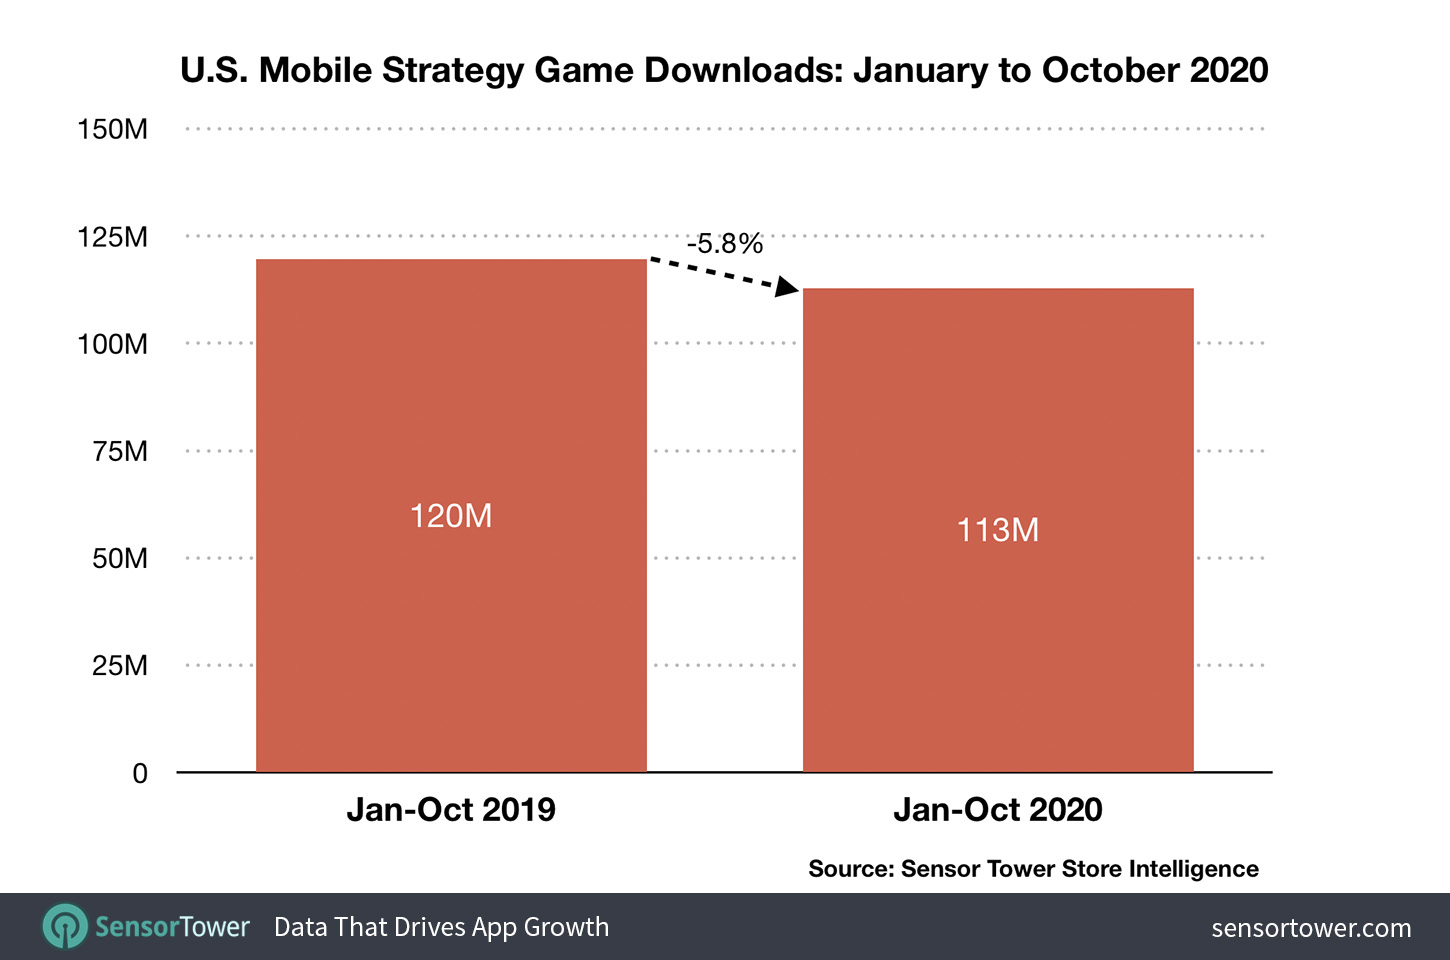 U.S. Mobile Strategy Game Downloads: January to October 2020